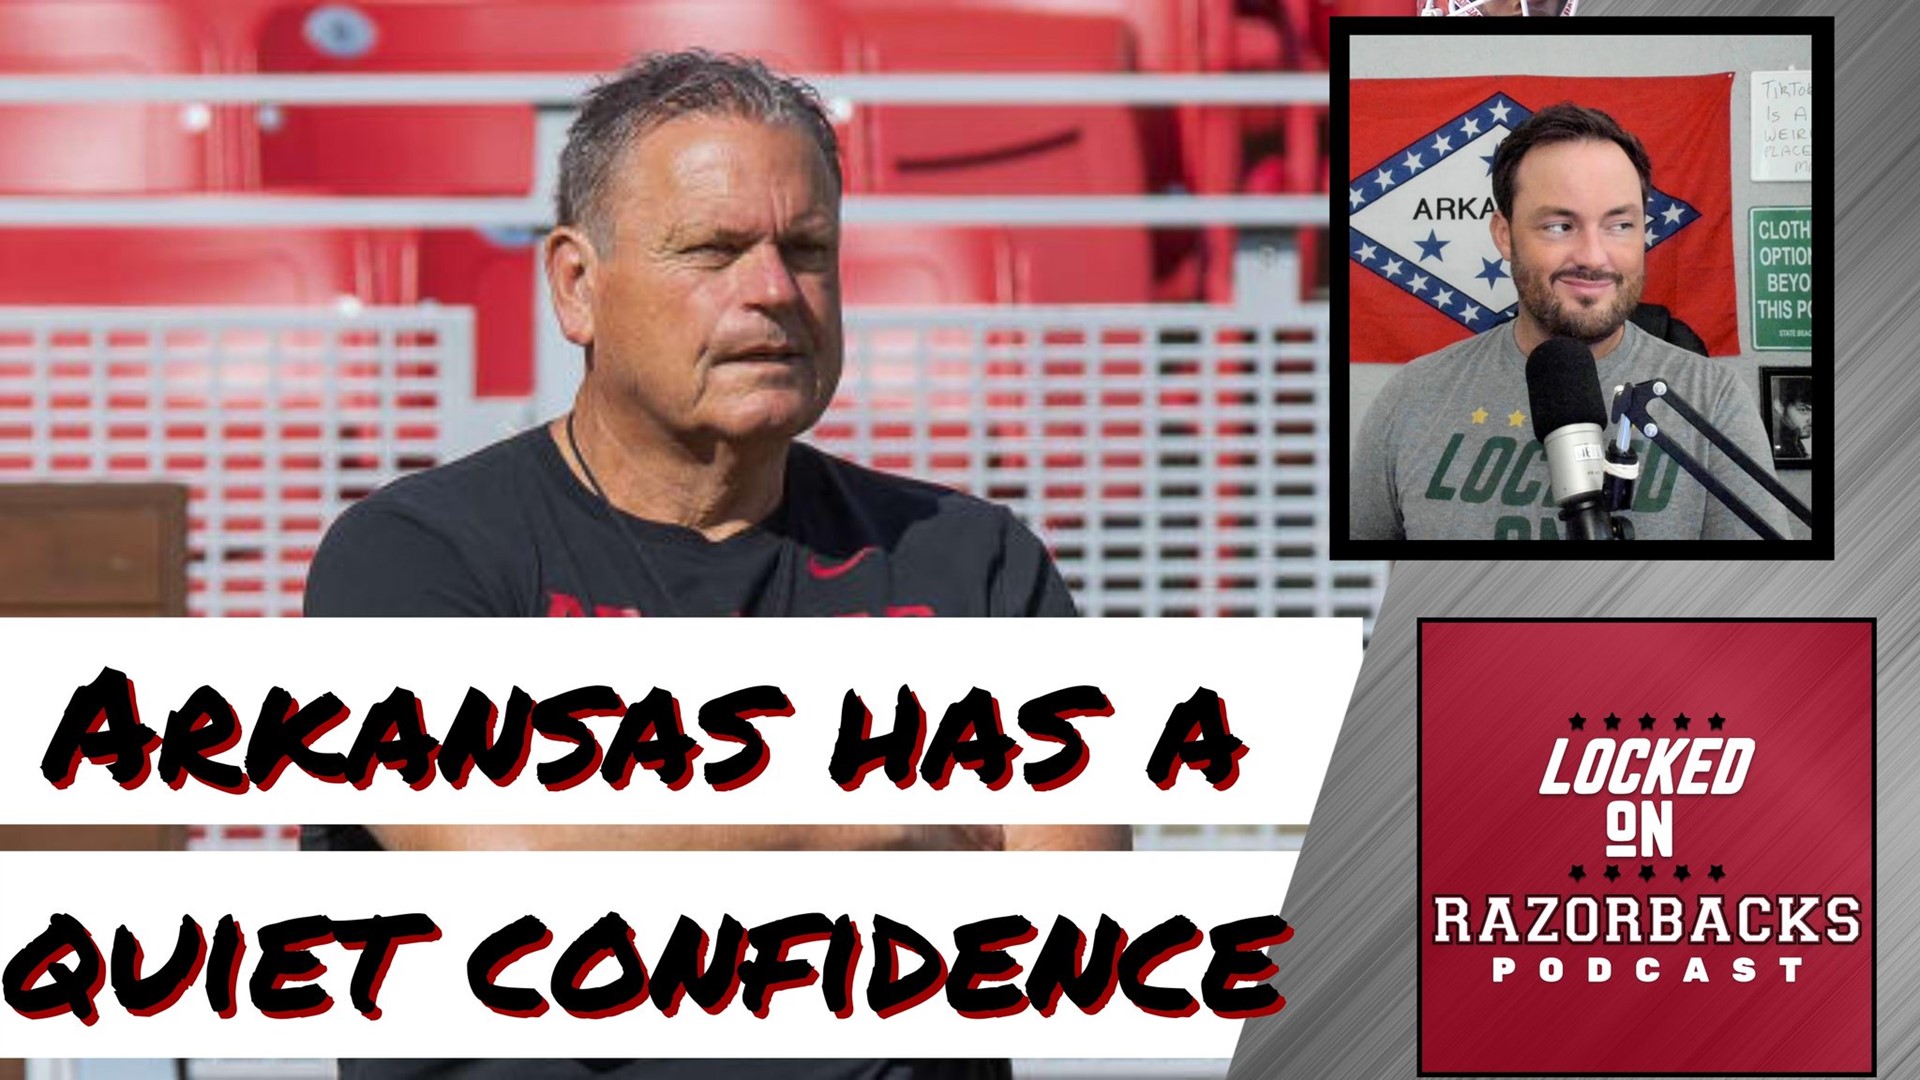 John Nabors discusses the reasons why Arkansas' quiet confidence can be a dangerous one this upcoming football season.